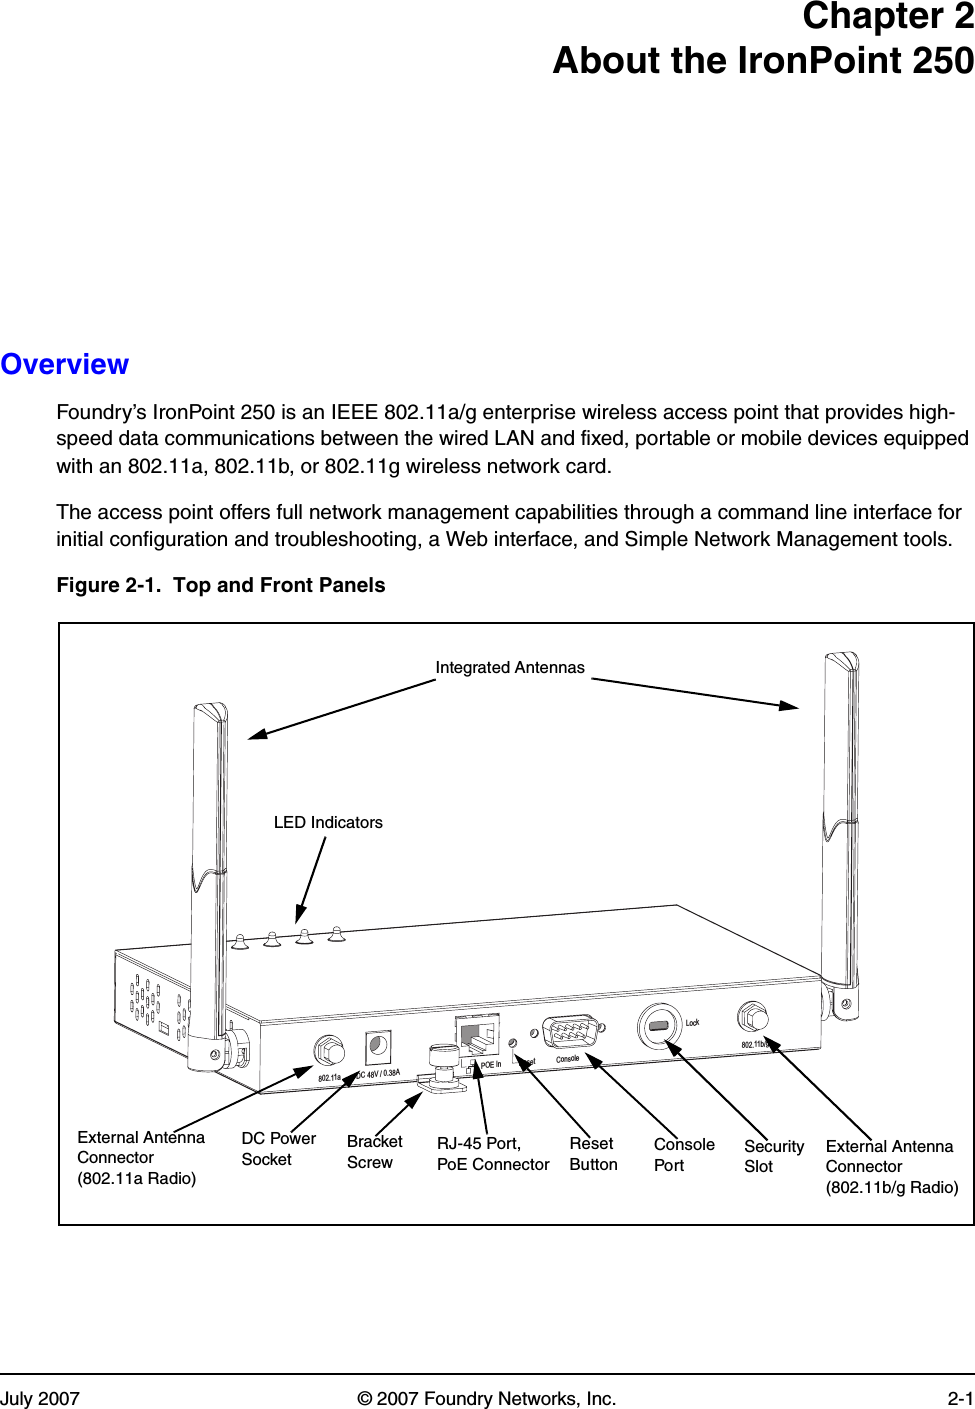 July 2007 © 2007 Foundry Networks, Inc. 2-1Chapter 2About the IronPoint 250OverviewFoundry’s IronPoint 250 is an IEEE 802.11a/g enterprise wireless access point that provides high-speed data communications between the wired LAN and fixed, portable or mobile devices equipped with an 802.11a, 802.11b, or 802.11g wireless network card.The access point offers full network management capabilities through a command line interface for initial configuration and troubleshooting, a Web interface, and Simple Network Management tools.Figure 2-1.  Top and Front PanelsDC48V / 0.38A POEIn Reset ConsoleLock802.11b/g802.11aSecurity SlotConsole PortRJ-45 Port, PoE ConnectorReset Button External Antenna Connector (802.11b/g Radio)DC Power SocketExternal Antenna Connector (802.11a Radio)Bracket ScrewLED IndicatorsIntegrated Antennas